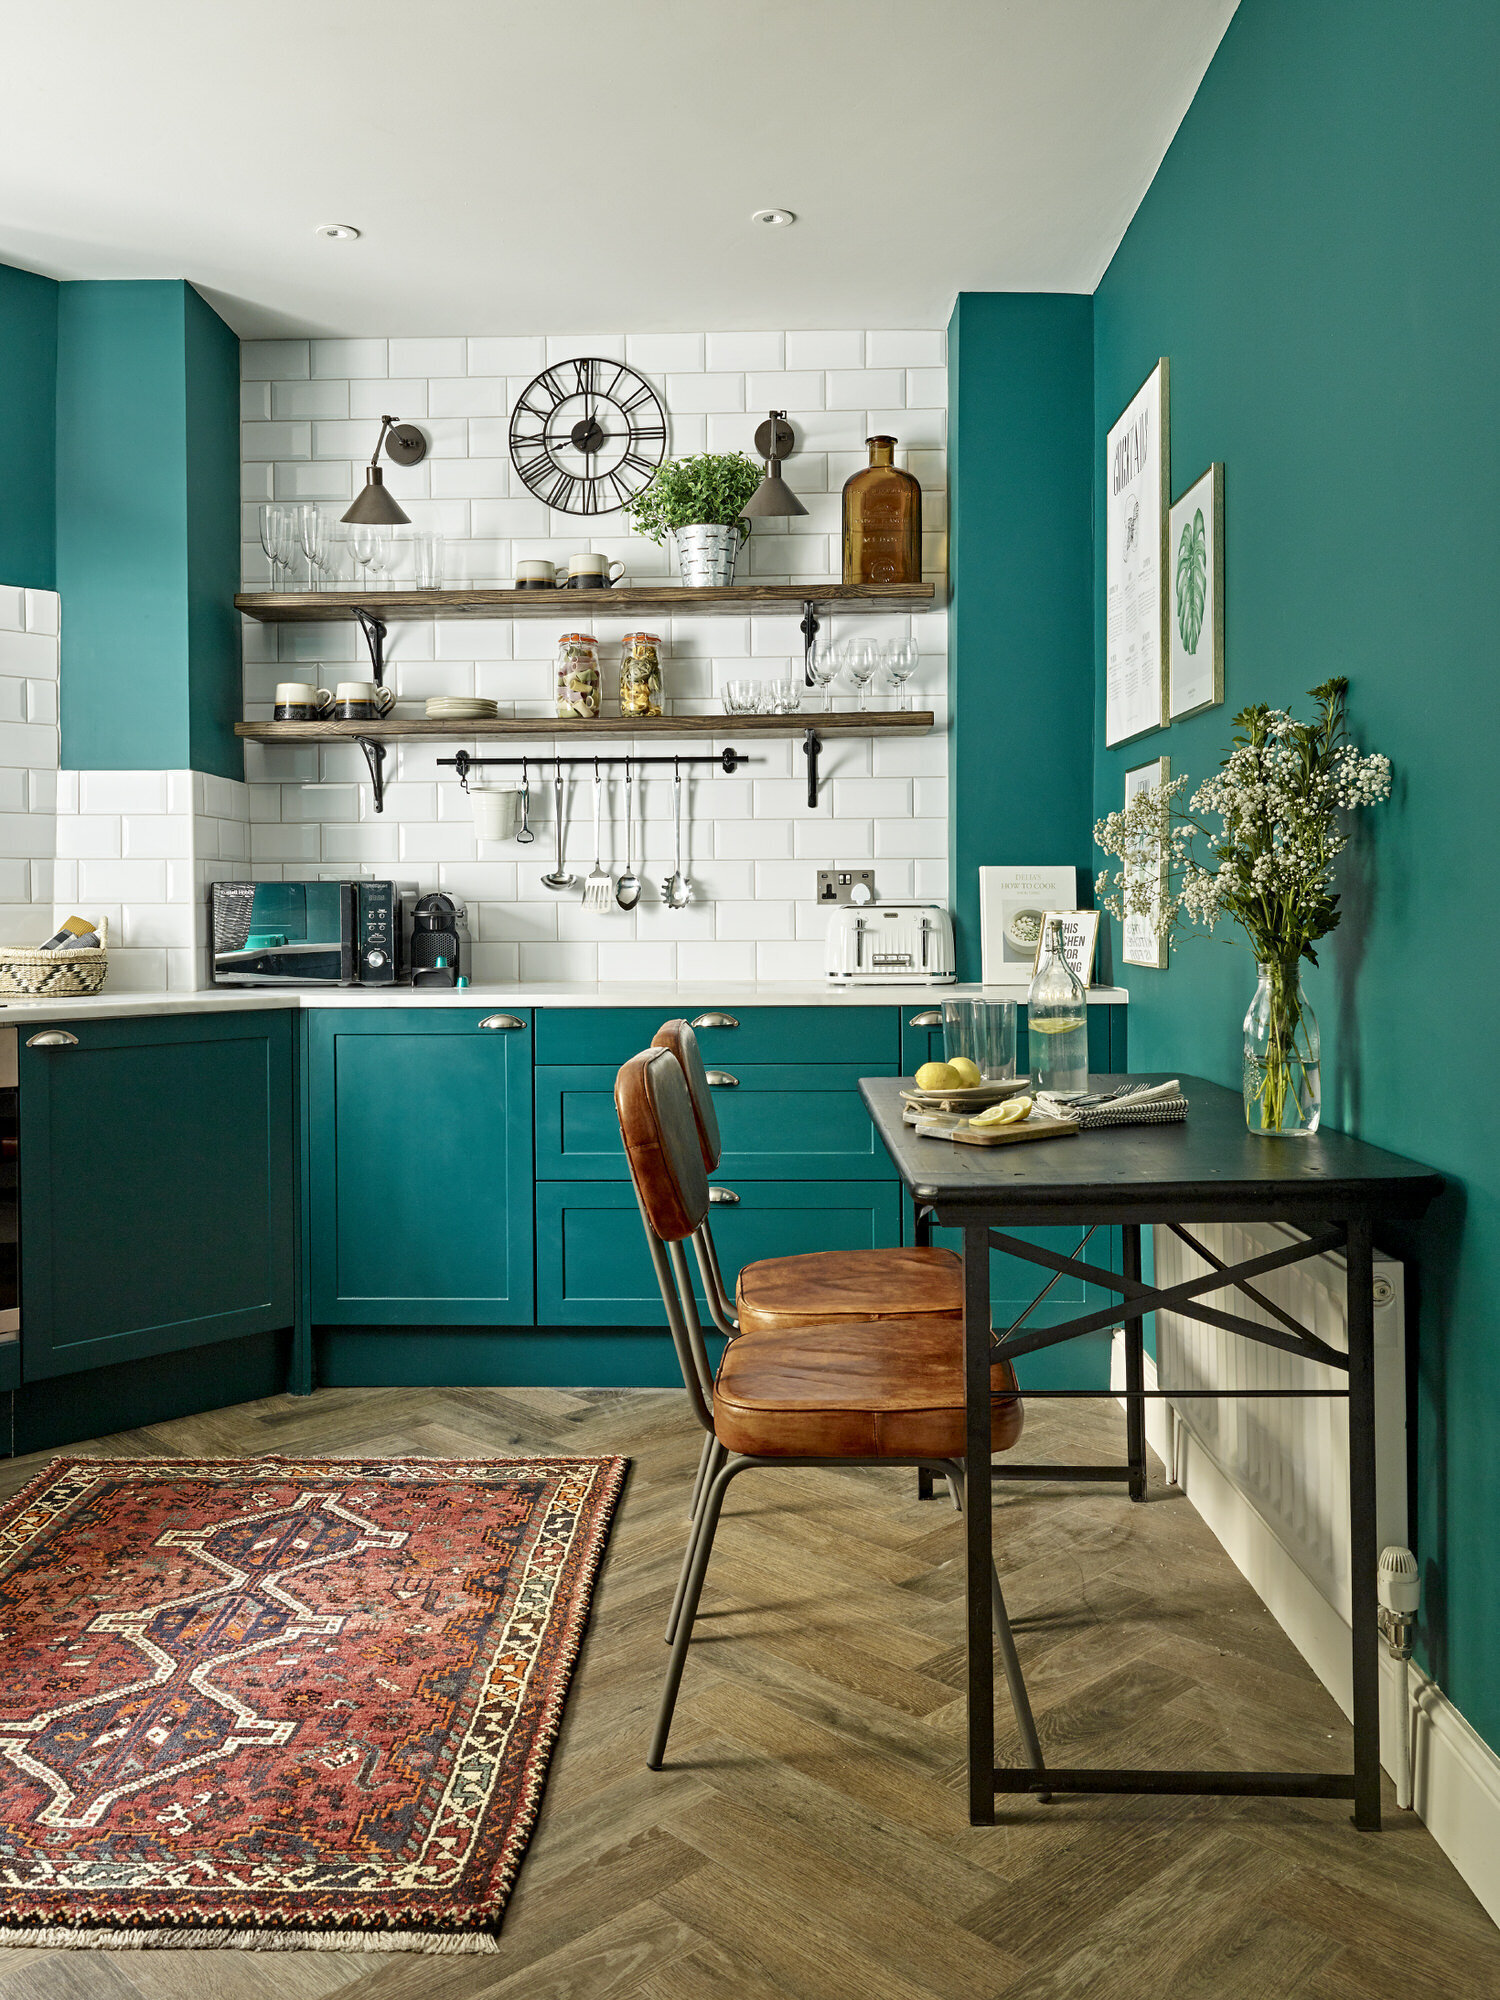 teal green kitchen with wood floors and white tile